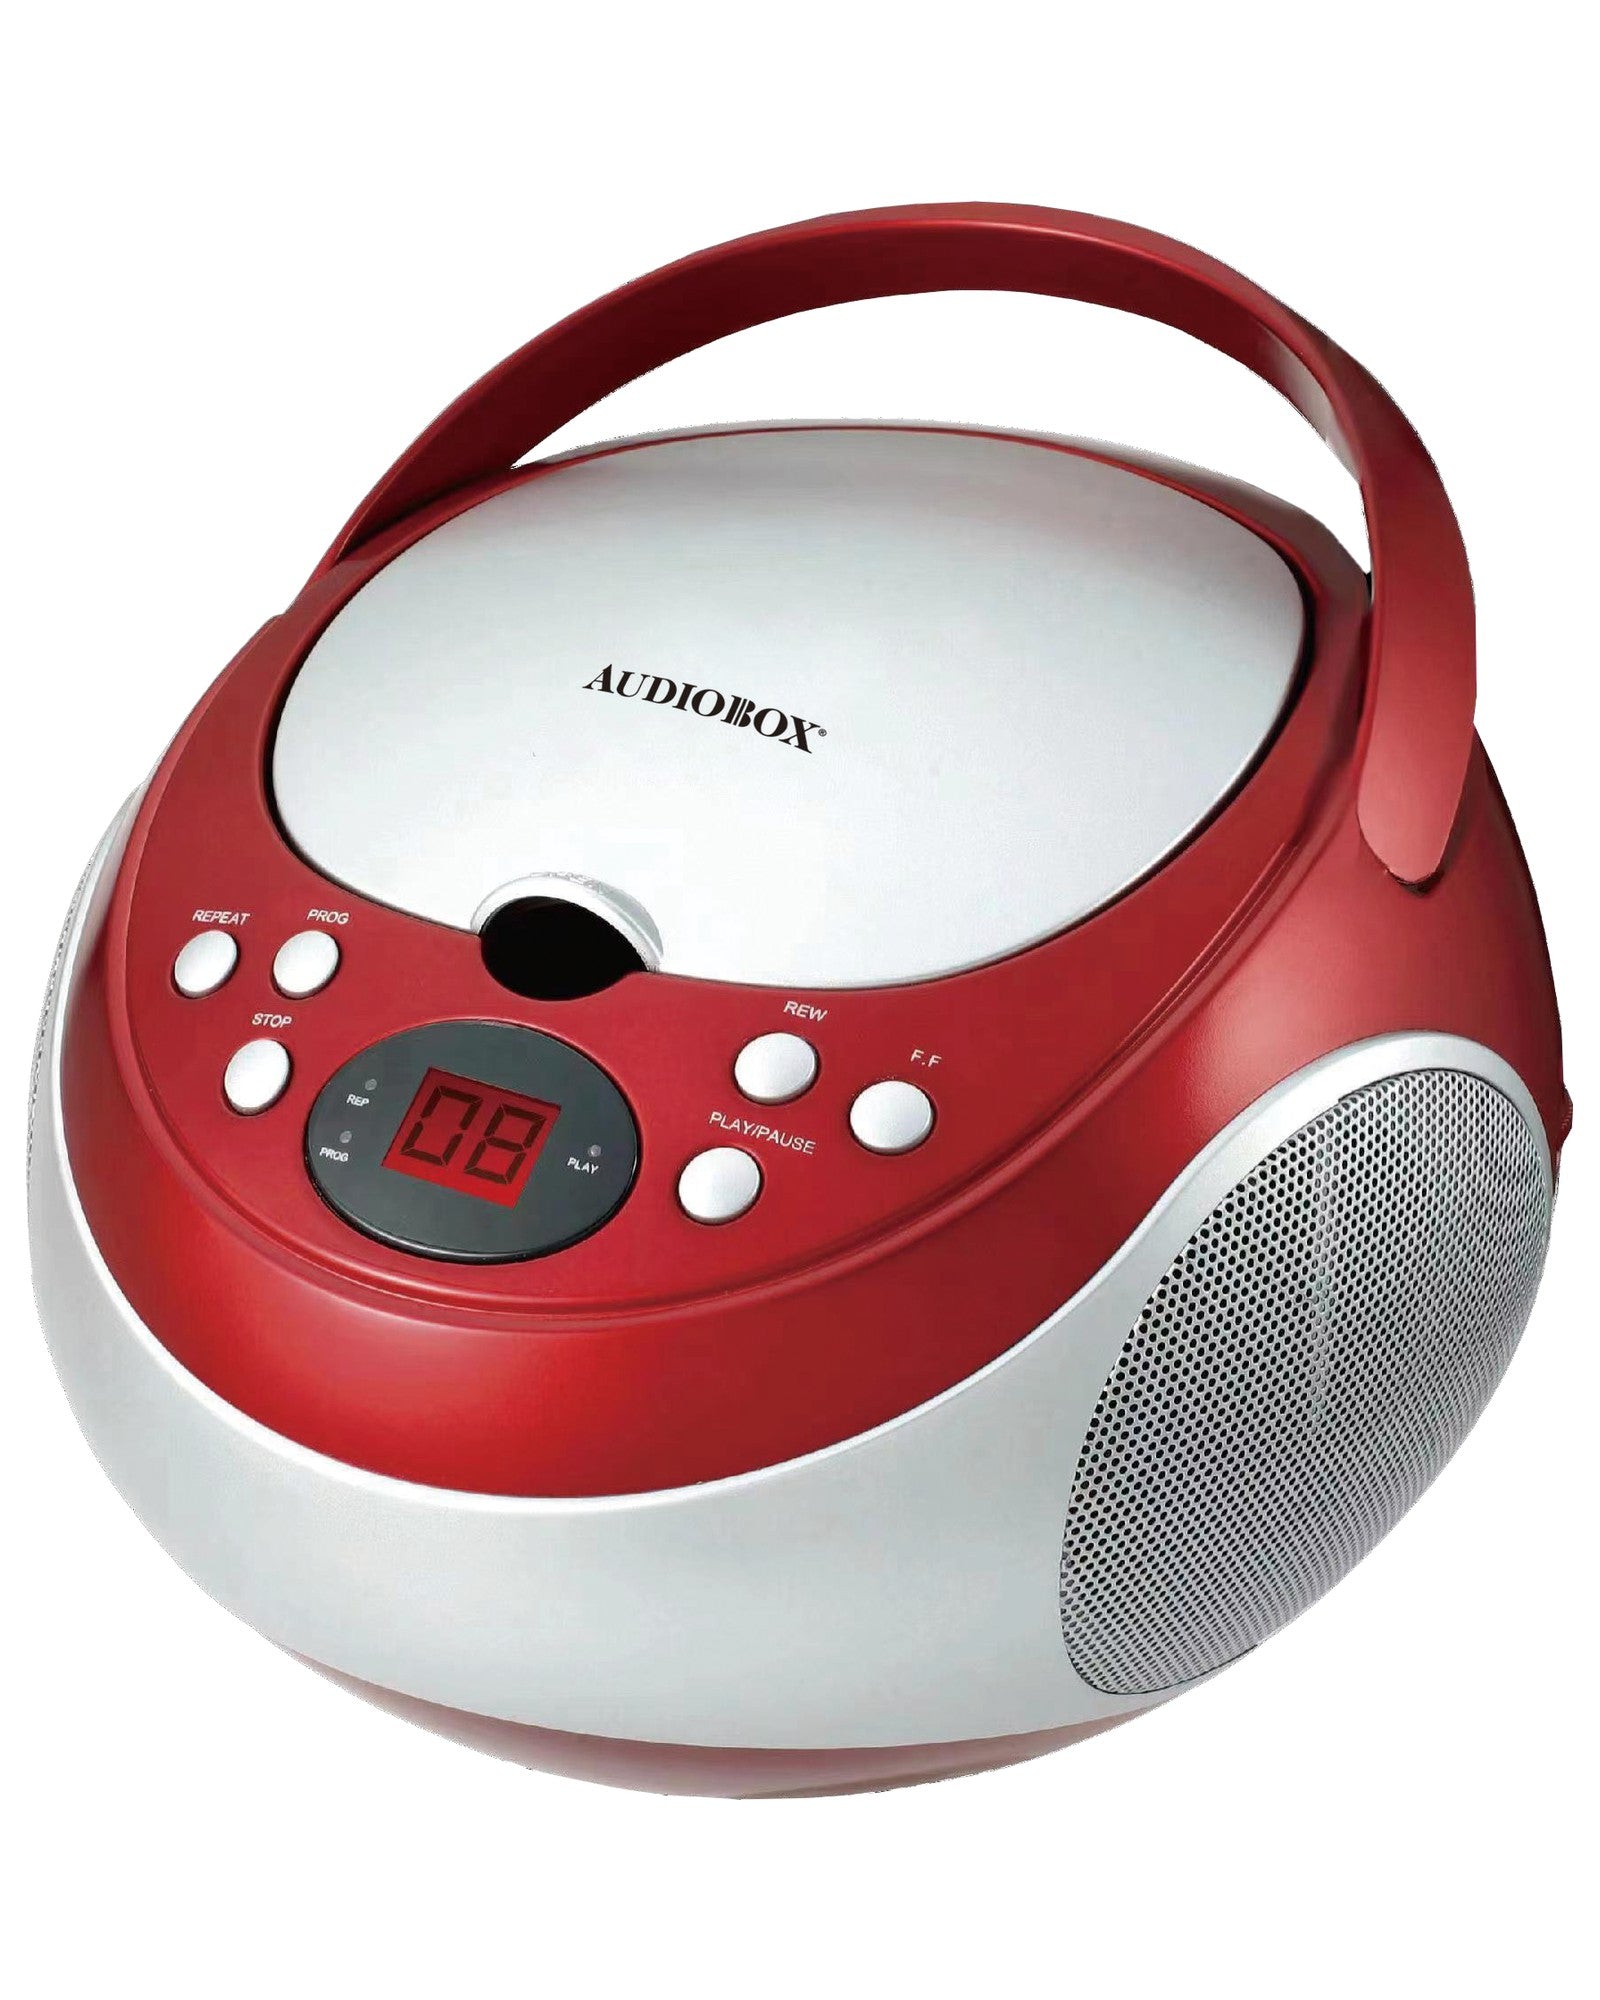 Audiobox CDX-100 Portable CD Player with AM/FM Stereo Radio - Top ElectrosCD PlayerCDX-100 - RED